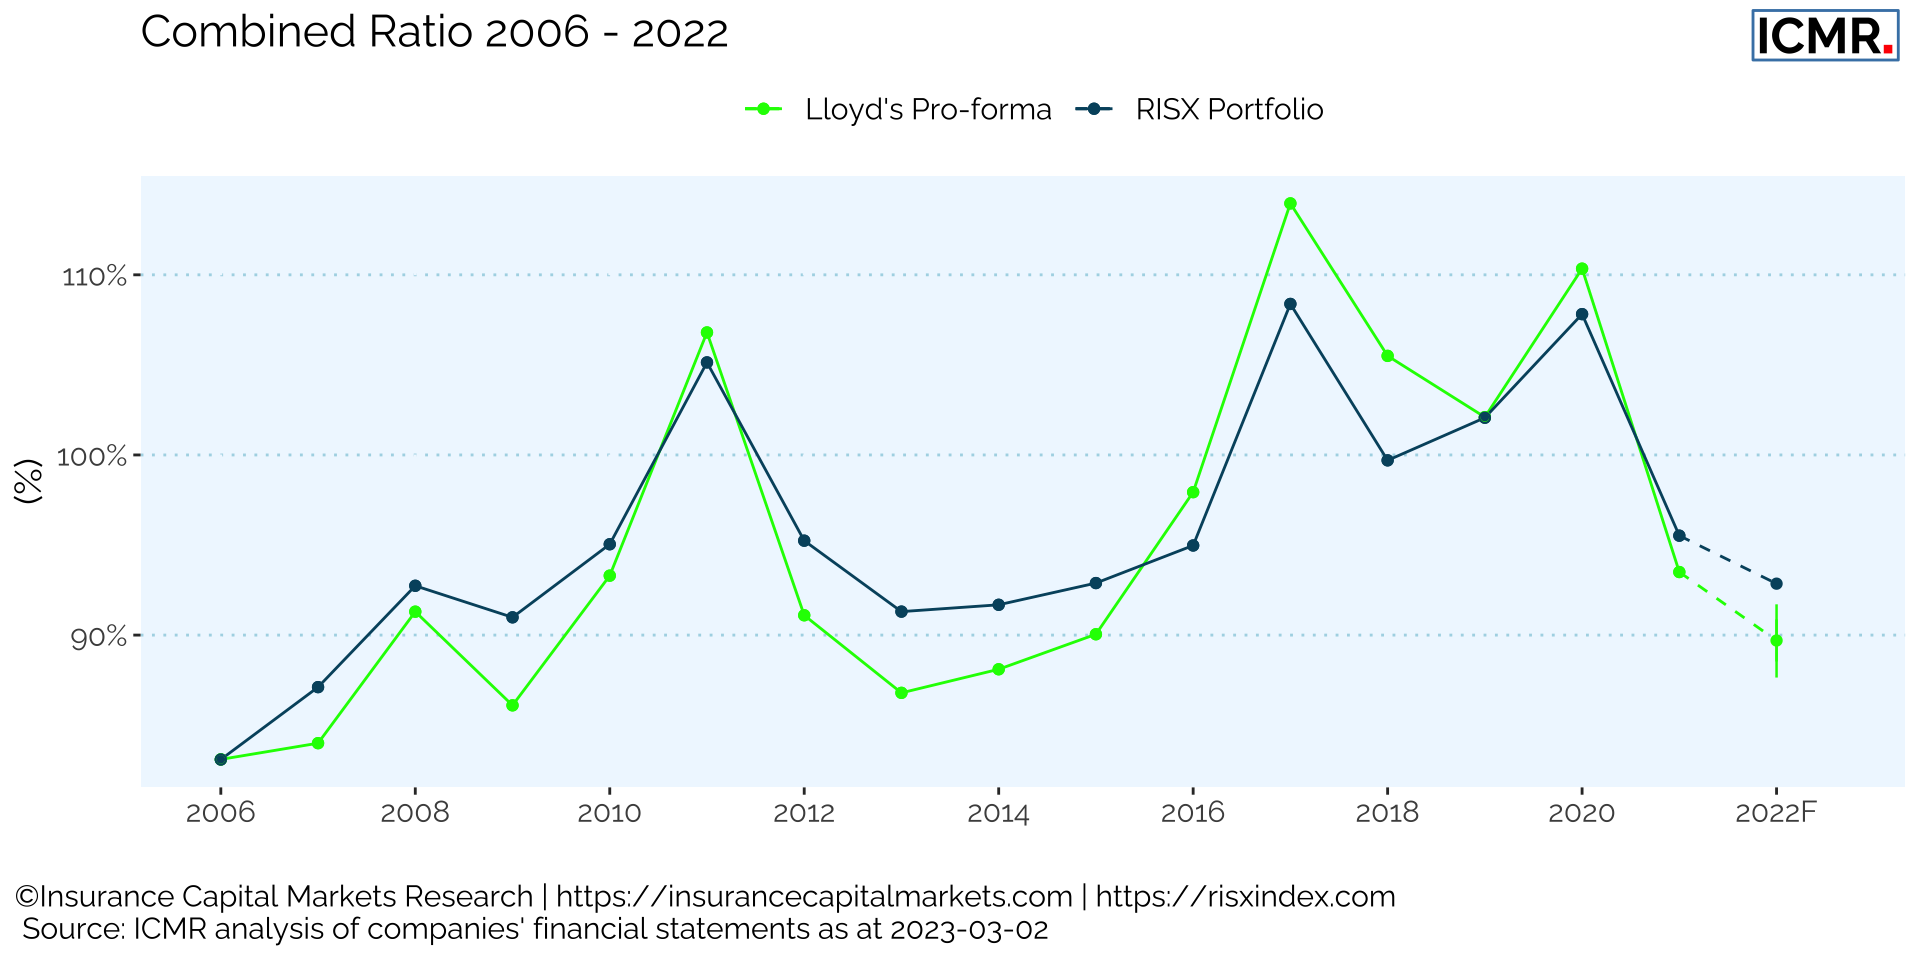 Lloyd's 2022 forecasted combined ratio shown with 50% credible interval.